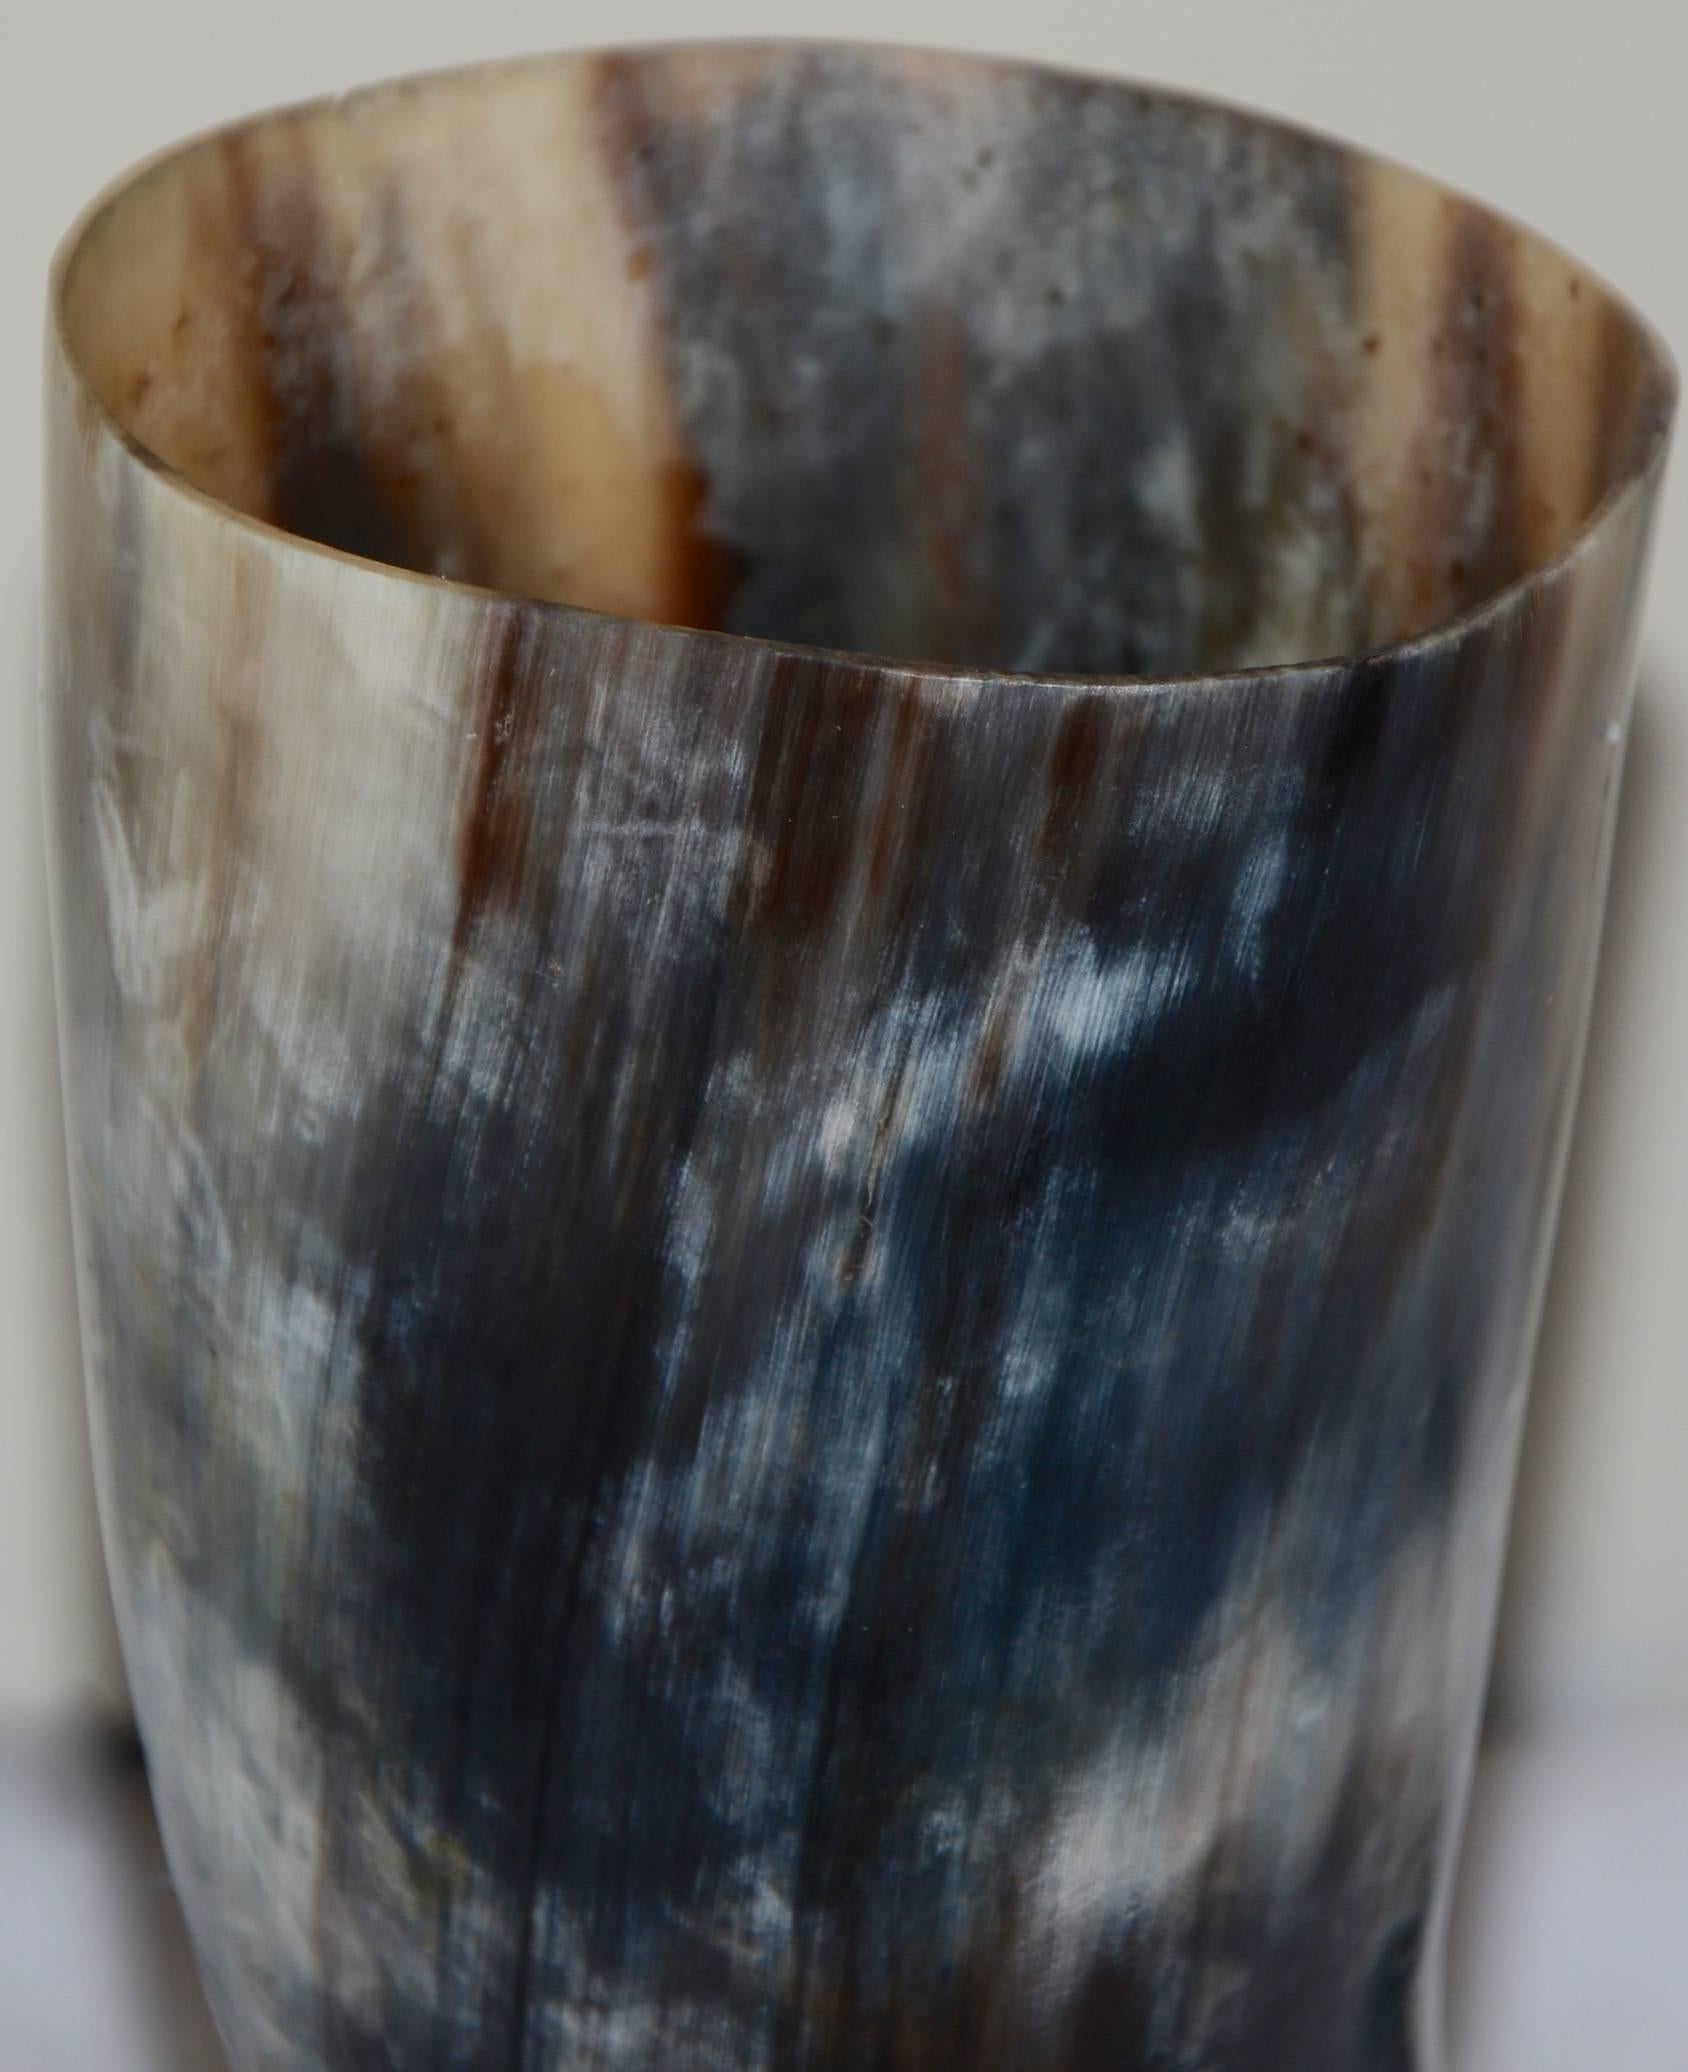 The colors in this buffalo horn show the true beauty of nature. The black horn from a buffalo displays striations of black, brown and white throughout the horn. The horn is presented on a silver finish metal hook which will look fabulous displayed